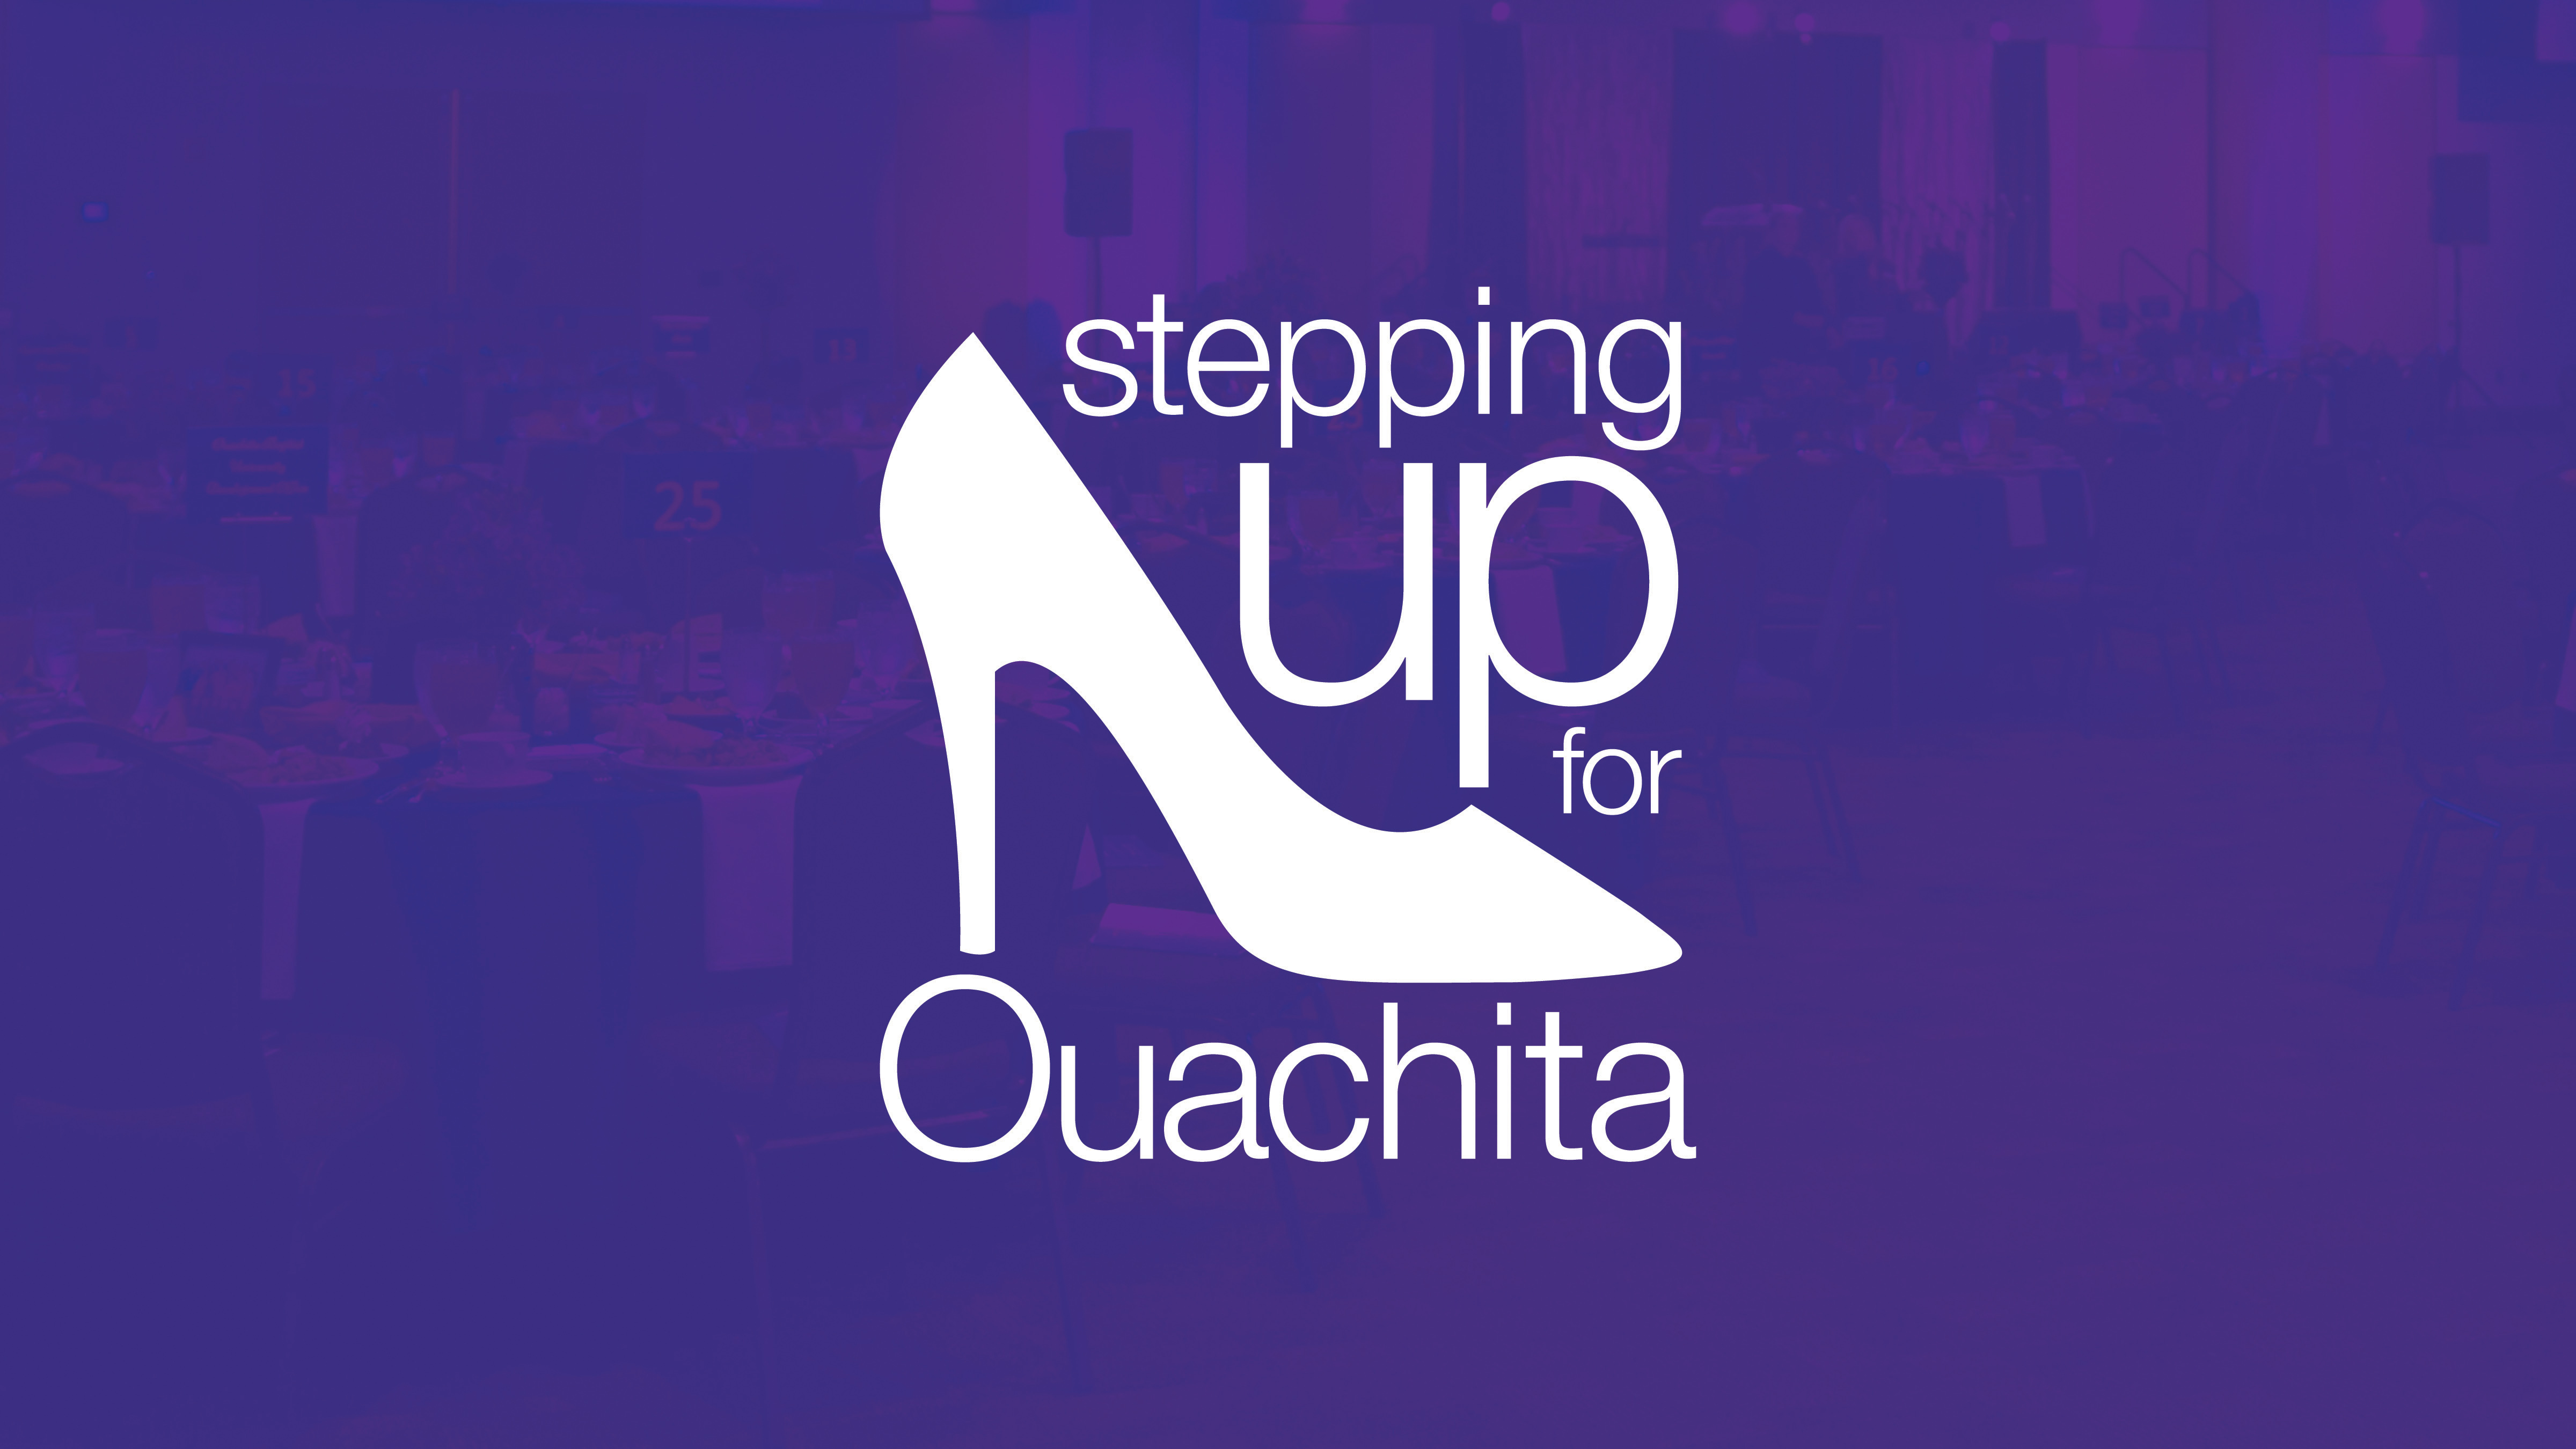 Stepping Up for Ouachita